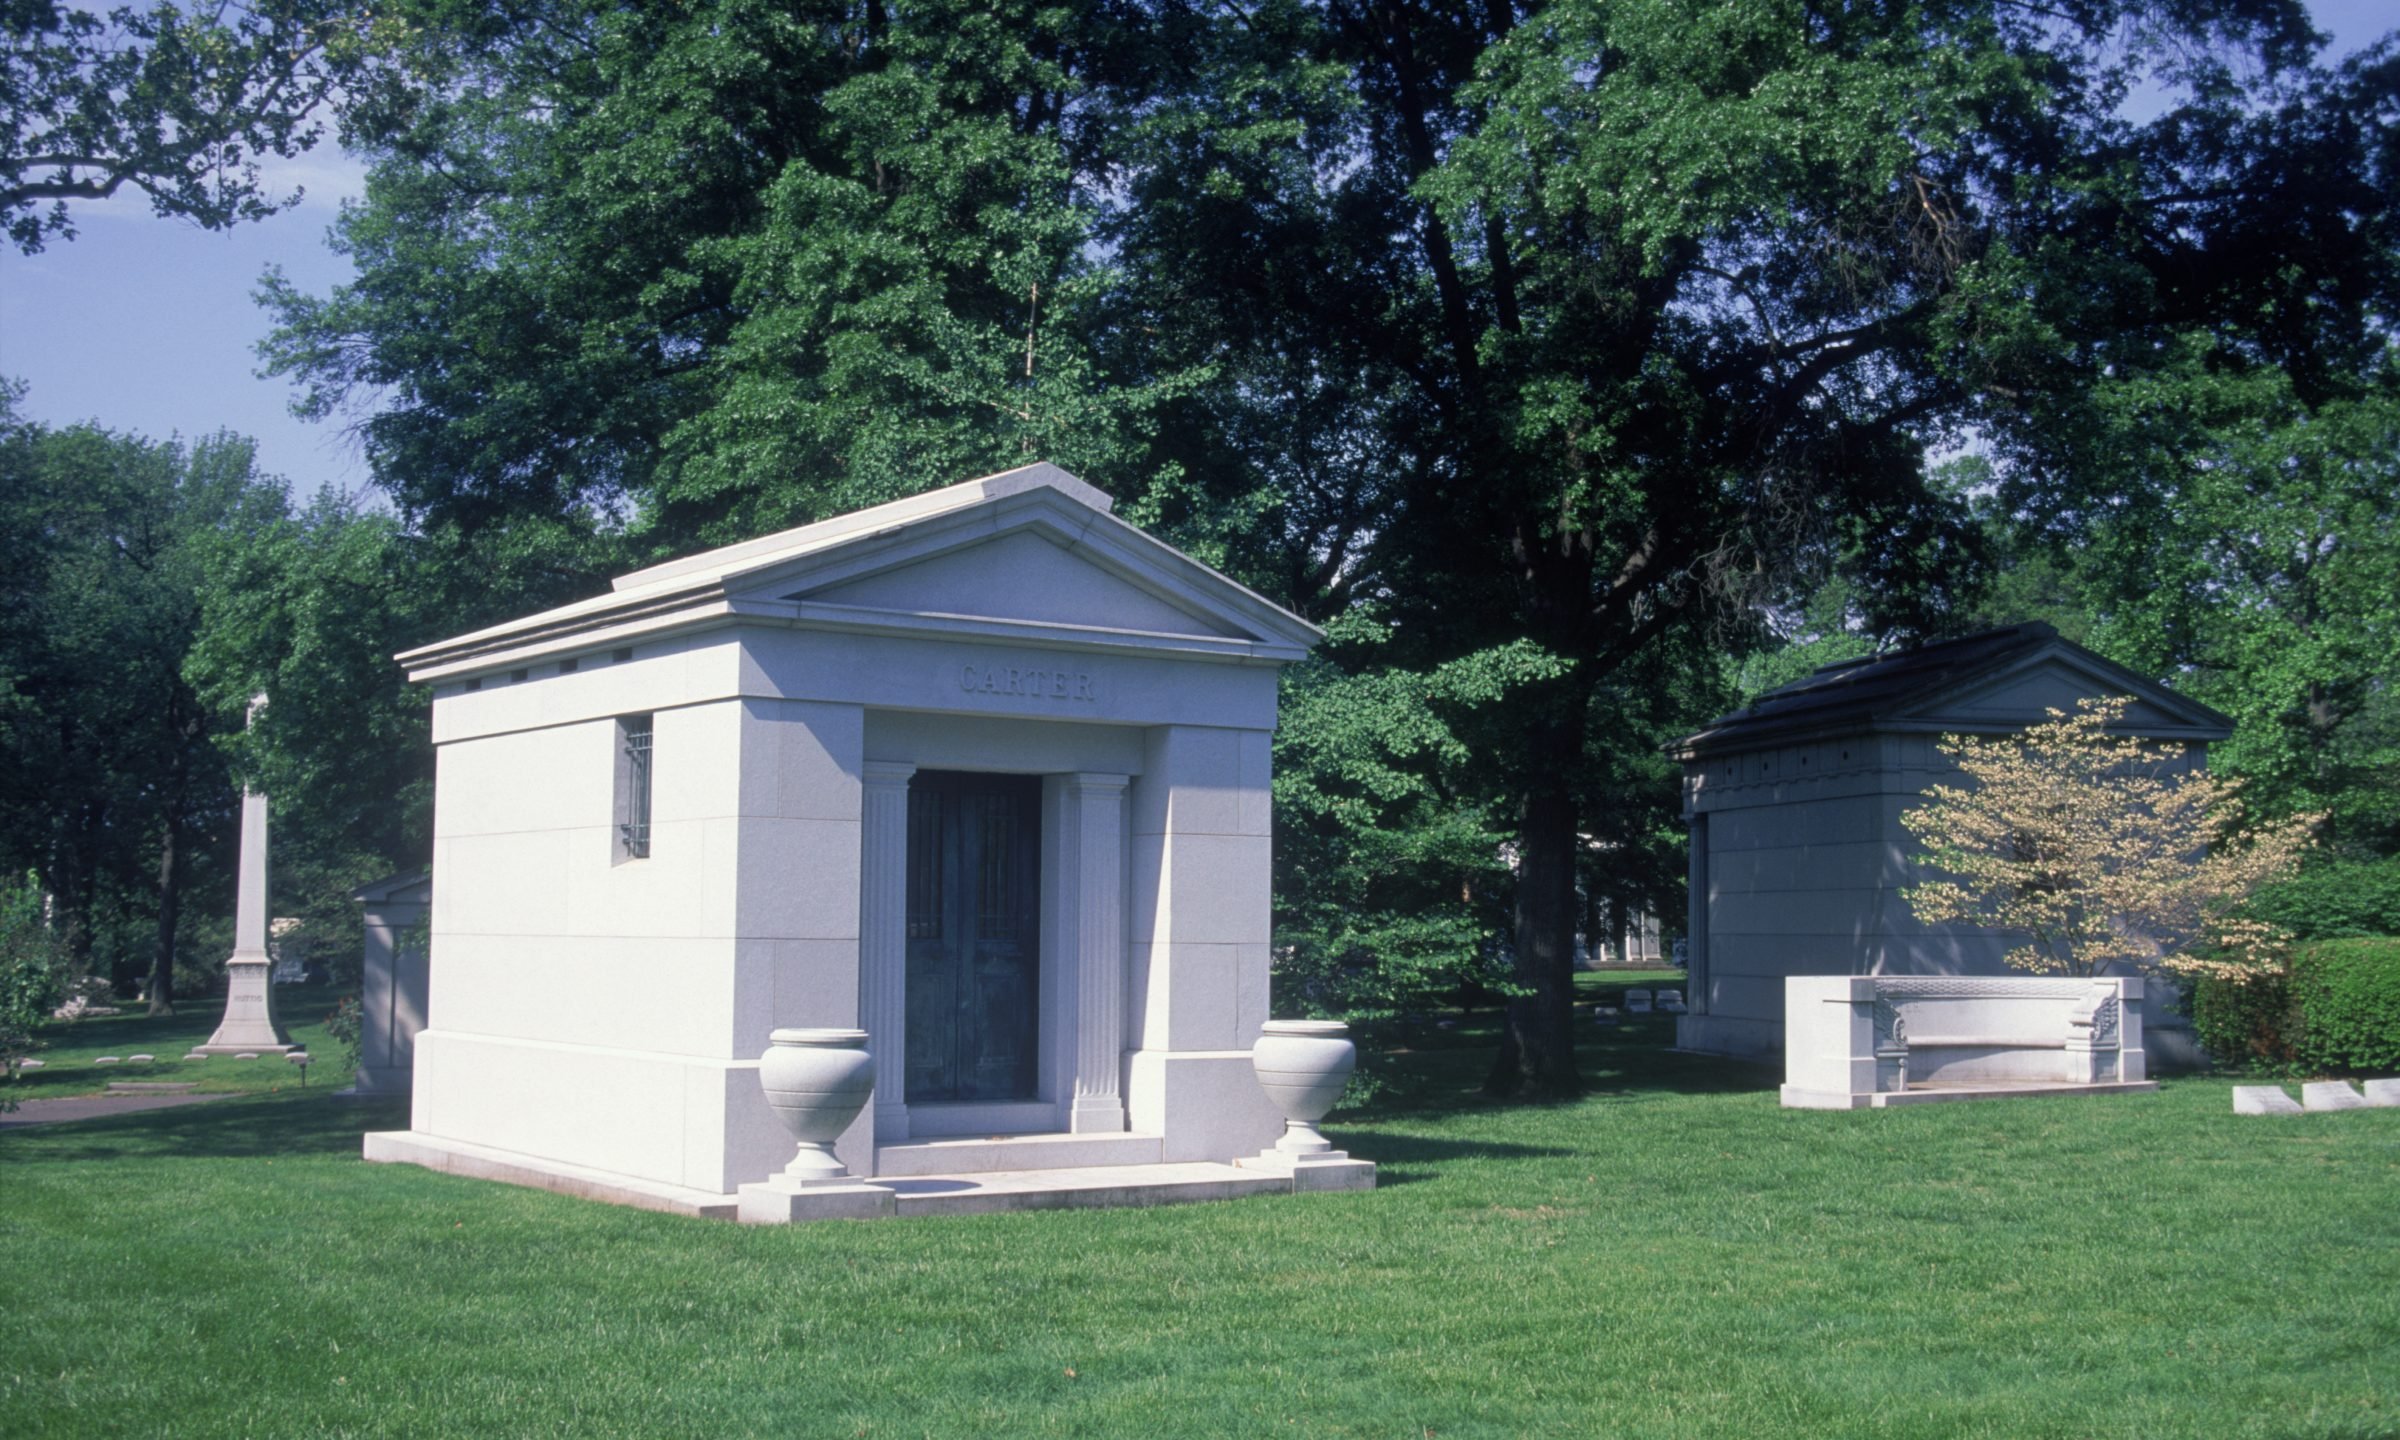 What is a Mausoleum? Purpose, Cost, How to Choose - NerdWallet